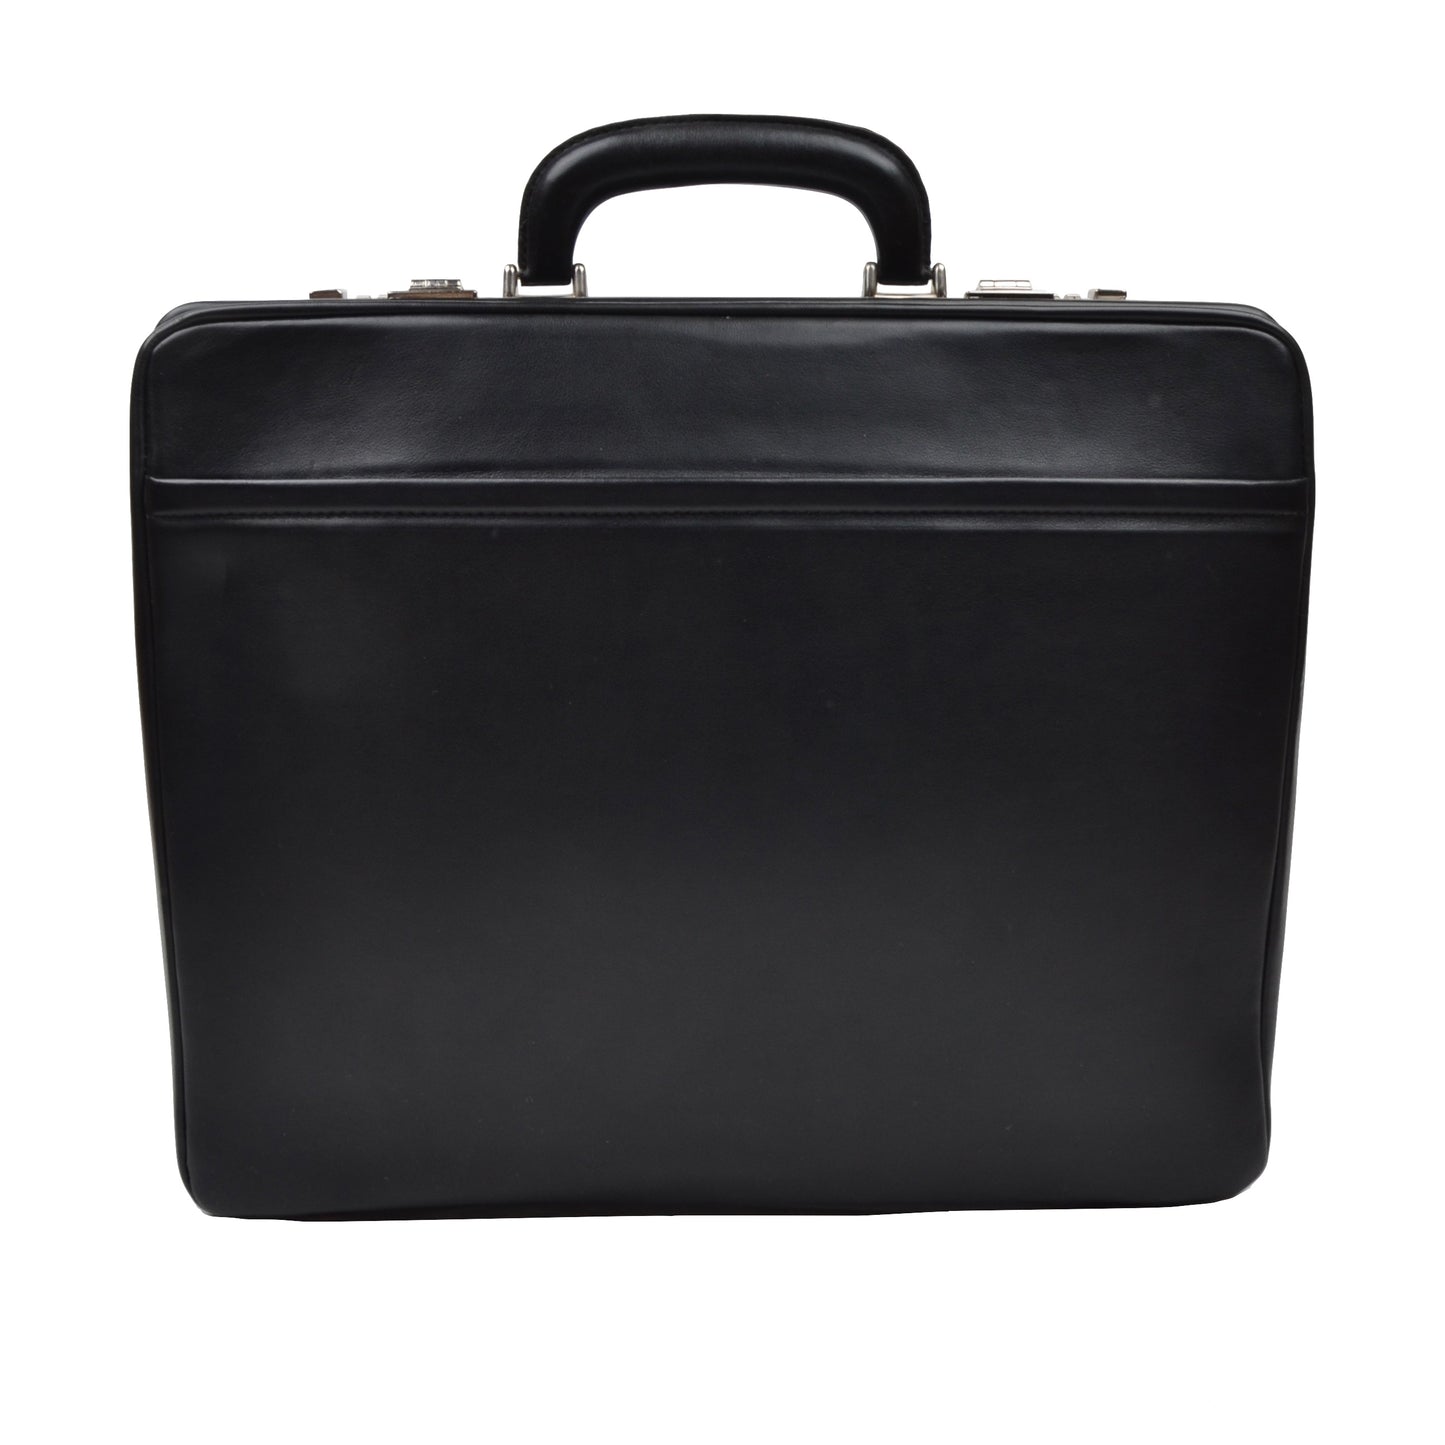 Offermann Flyer Leather Expandable Business Briefcase - Black